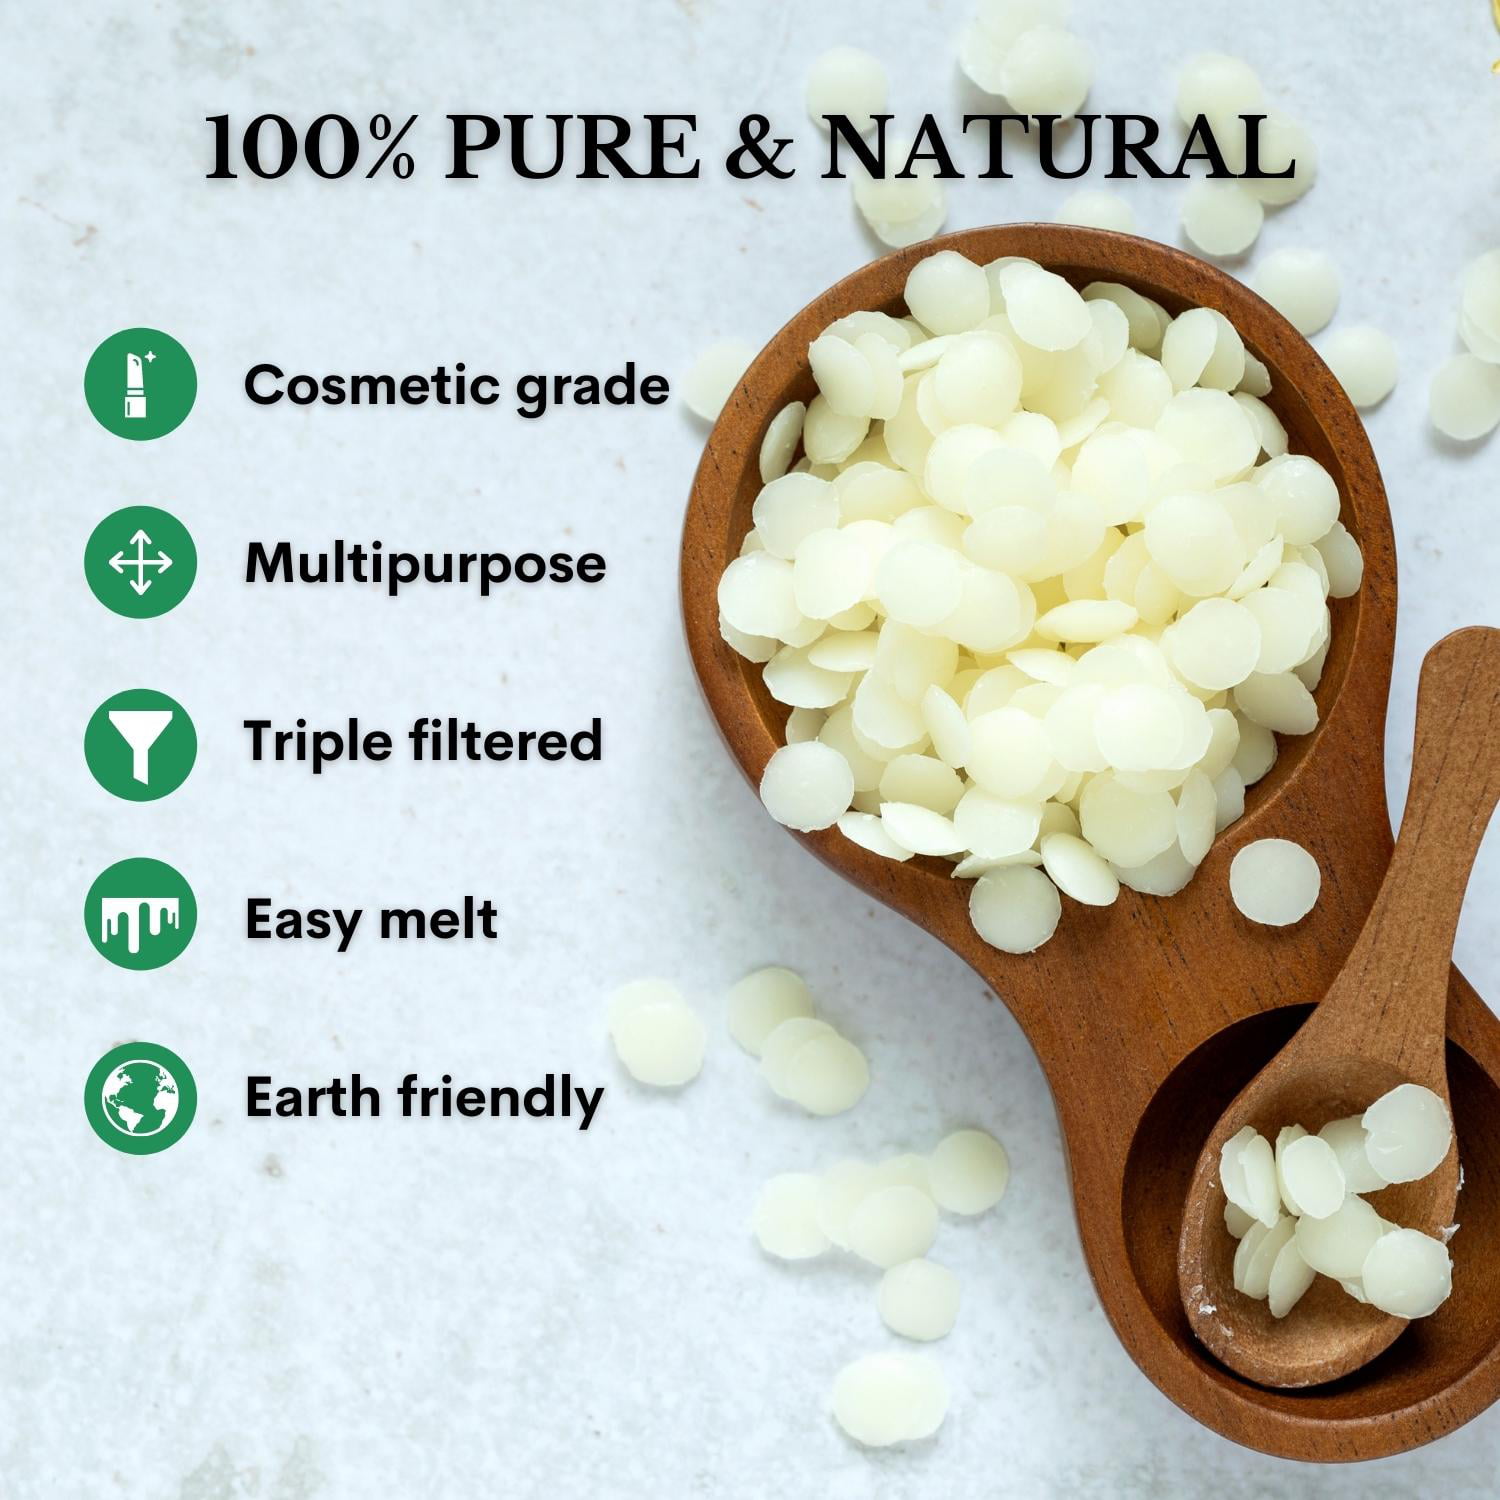 Purime Organic Beeswax Pellets 1lb, USDA Certified Pure White for Candle and Lotion Making, Food Grade Beeswax for Candle Making, Beeswax Pastilles